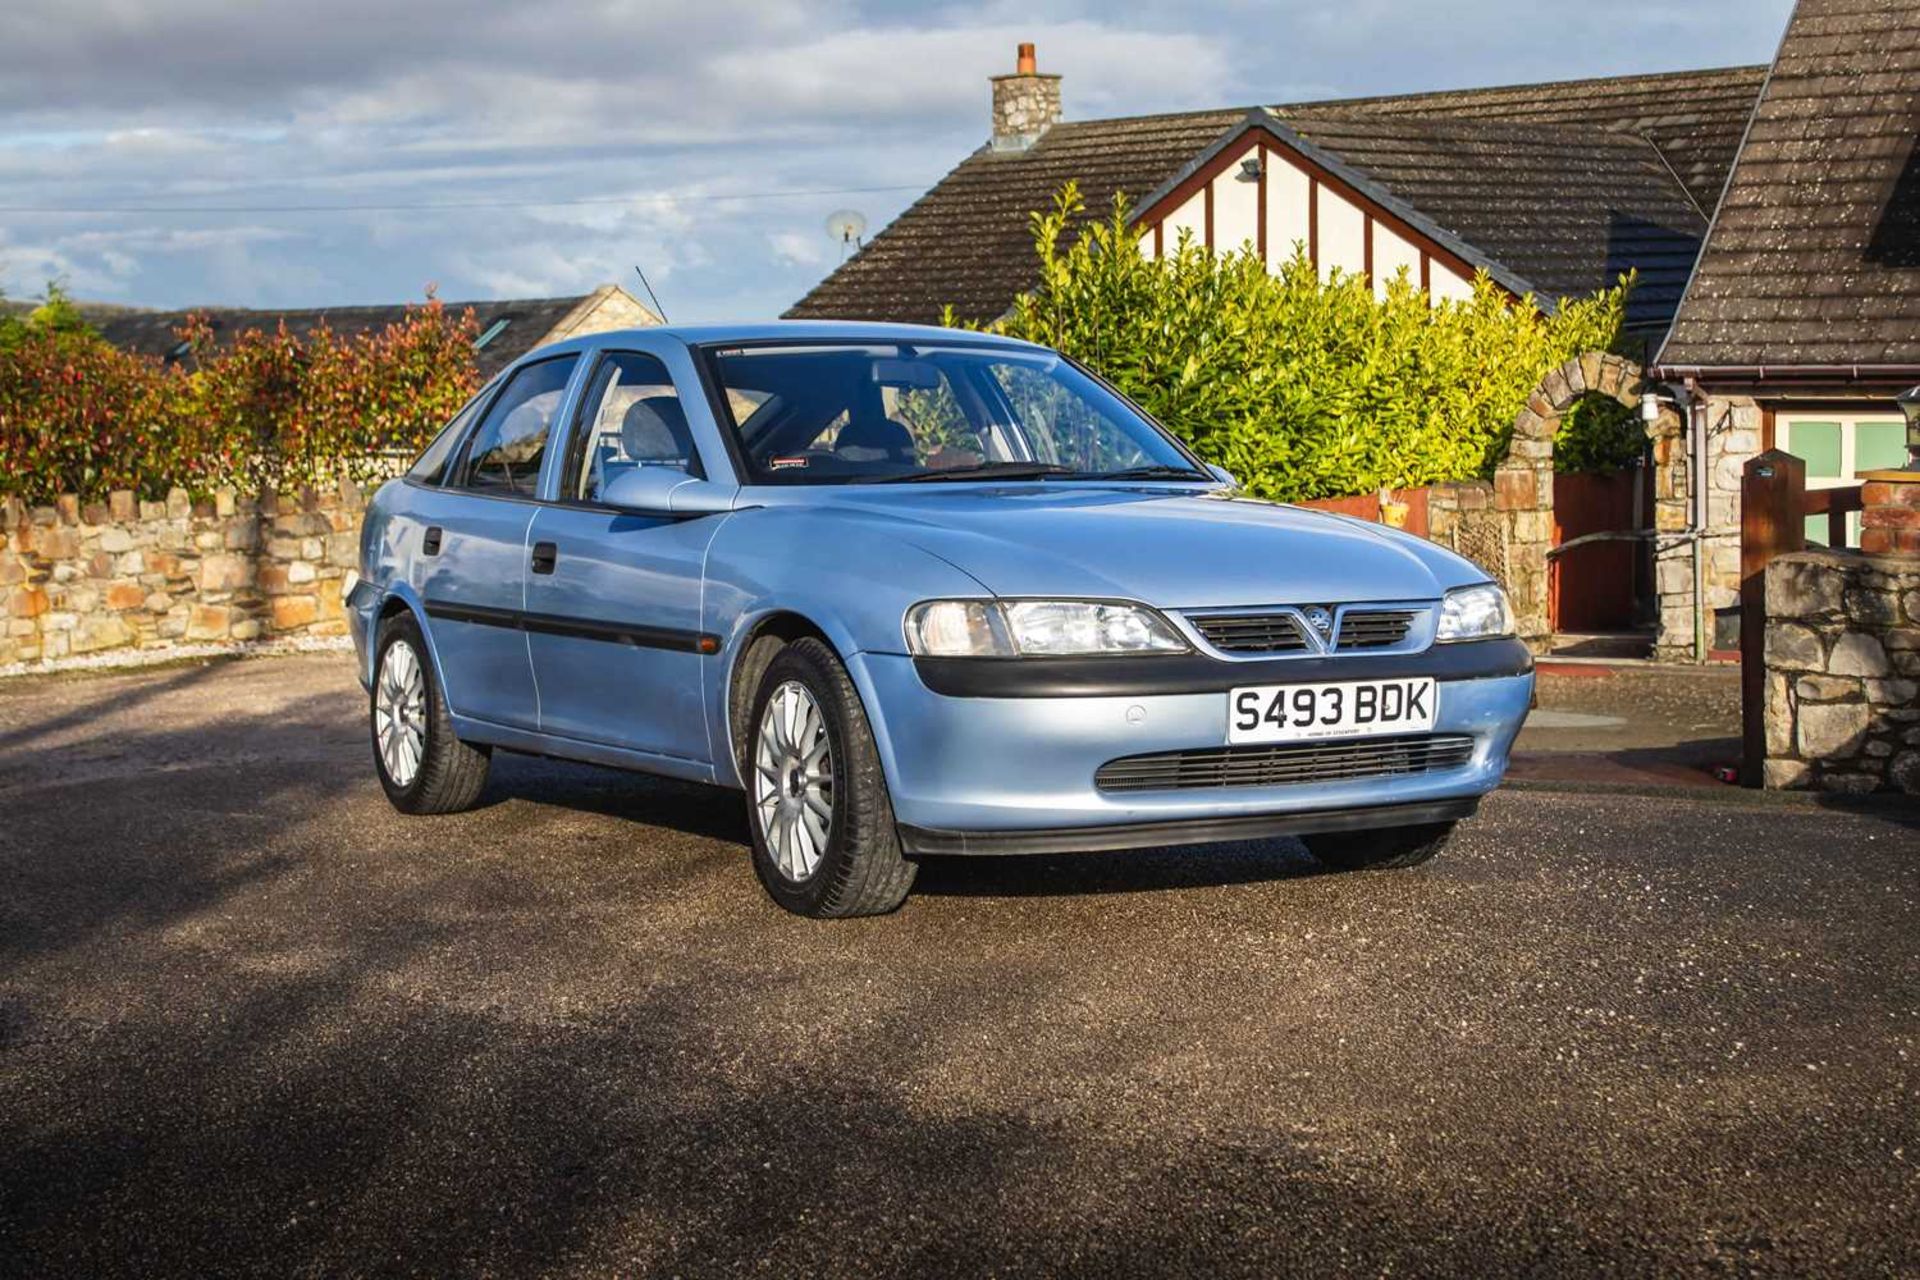 1998 Vauxhall Vectra 1.6 Envoy Automatic transmission and only 25,000 miles from new ***NO RESERVE**